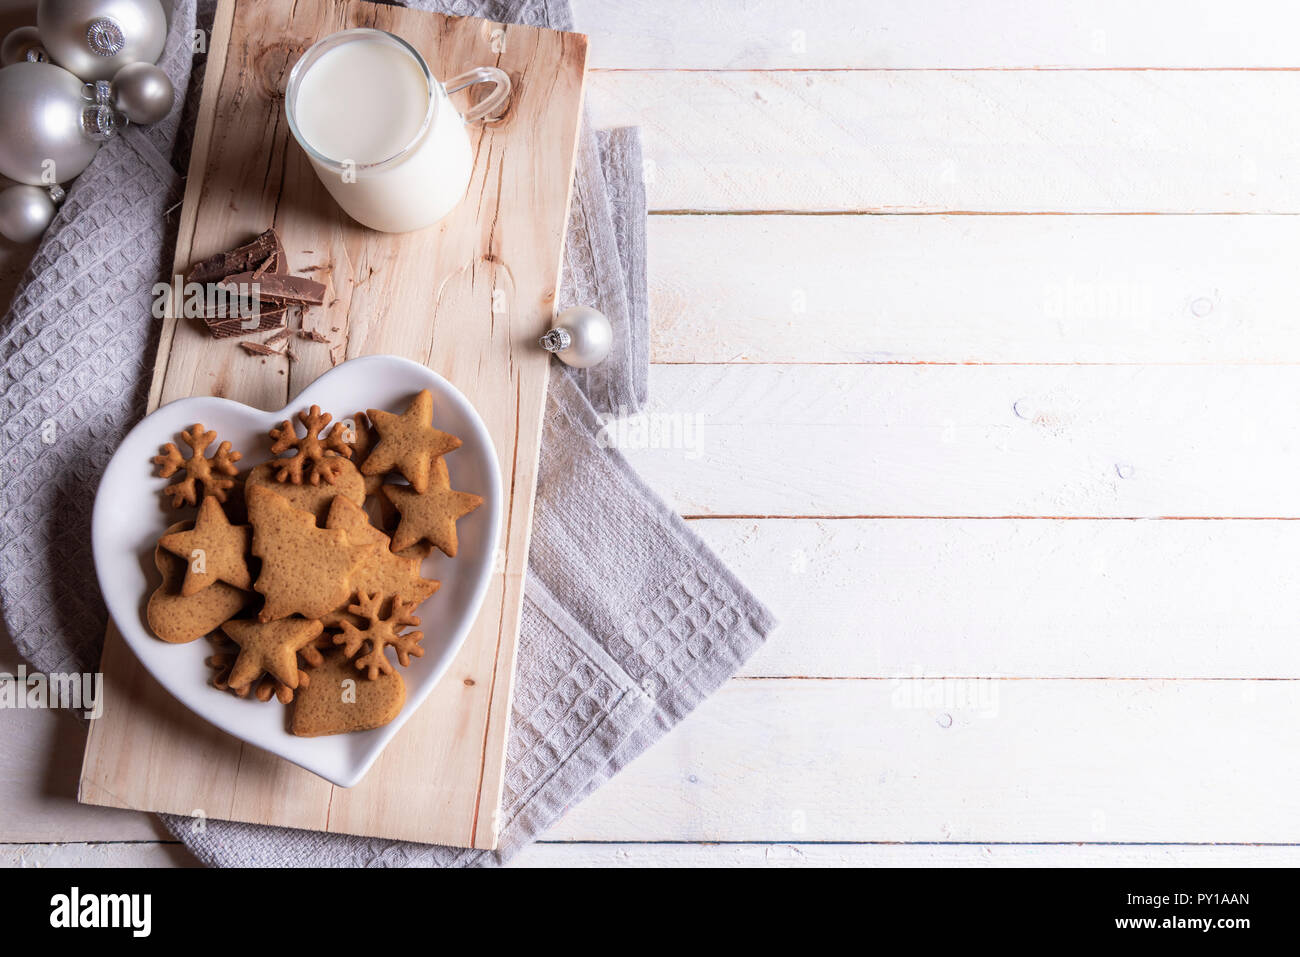 Santa Claus snack with gingerbread cookies on a heart-shaped plate, milk and chocolate, a kitchen towel and Christmas balls on a white table. Stock Photo